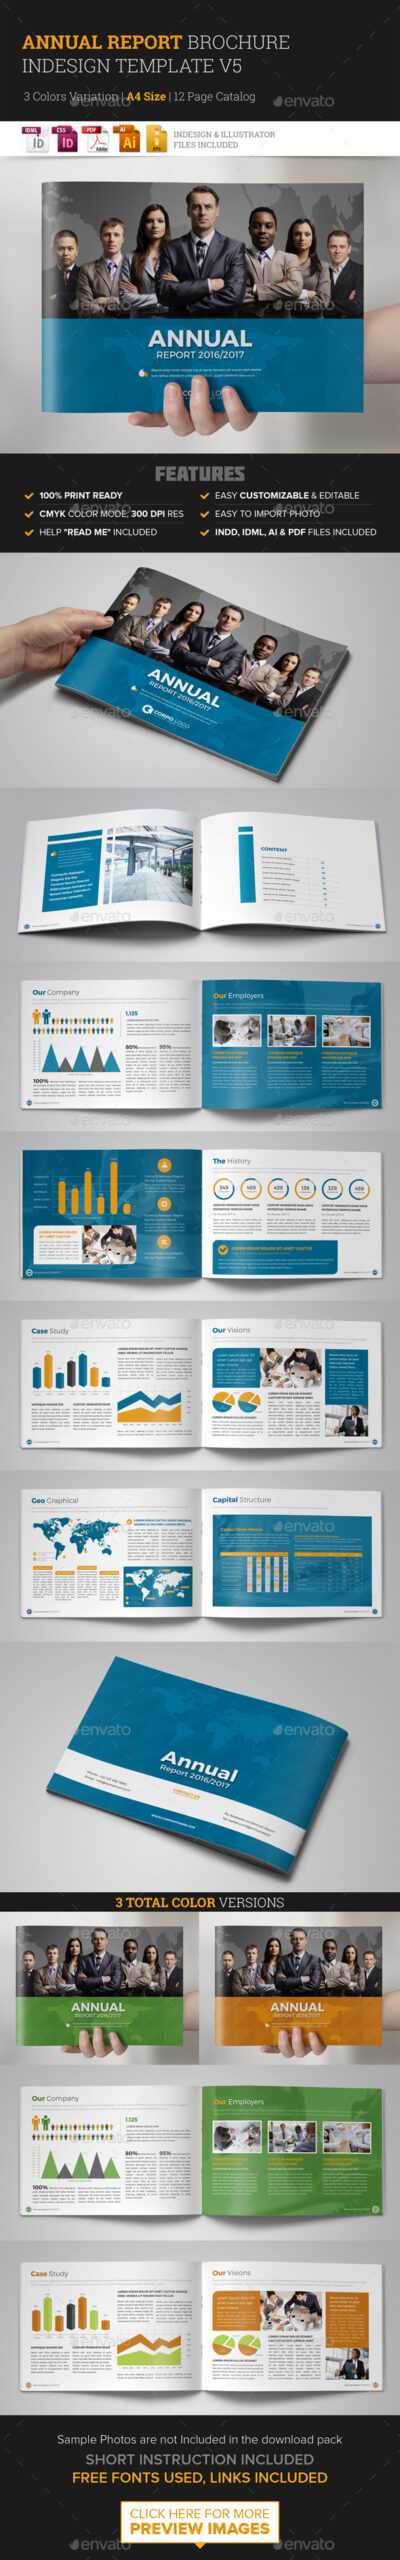 Annual Report Template Indesign Graphics, Designs & Templates Pertaining To Free Indesign Report Templates